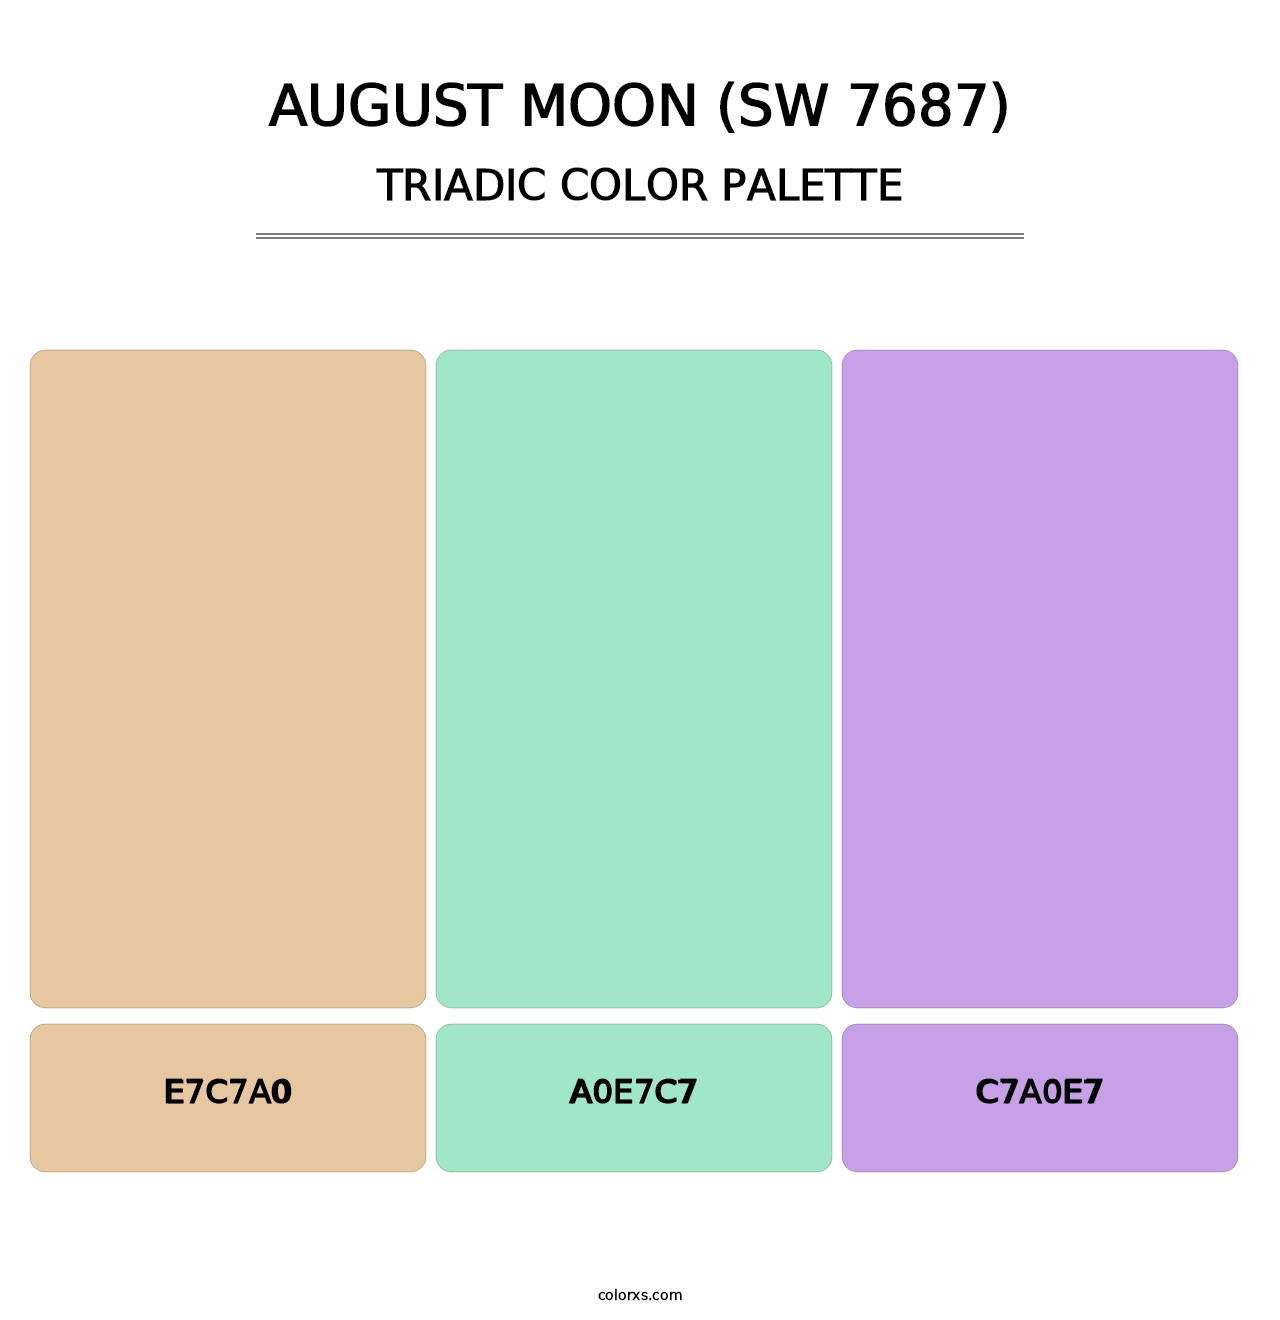 August Moon (SW 7687) - Triadic Color Palette